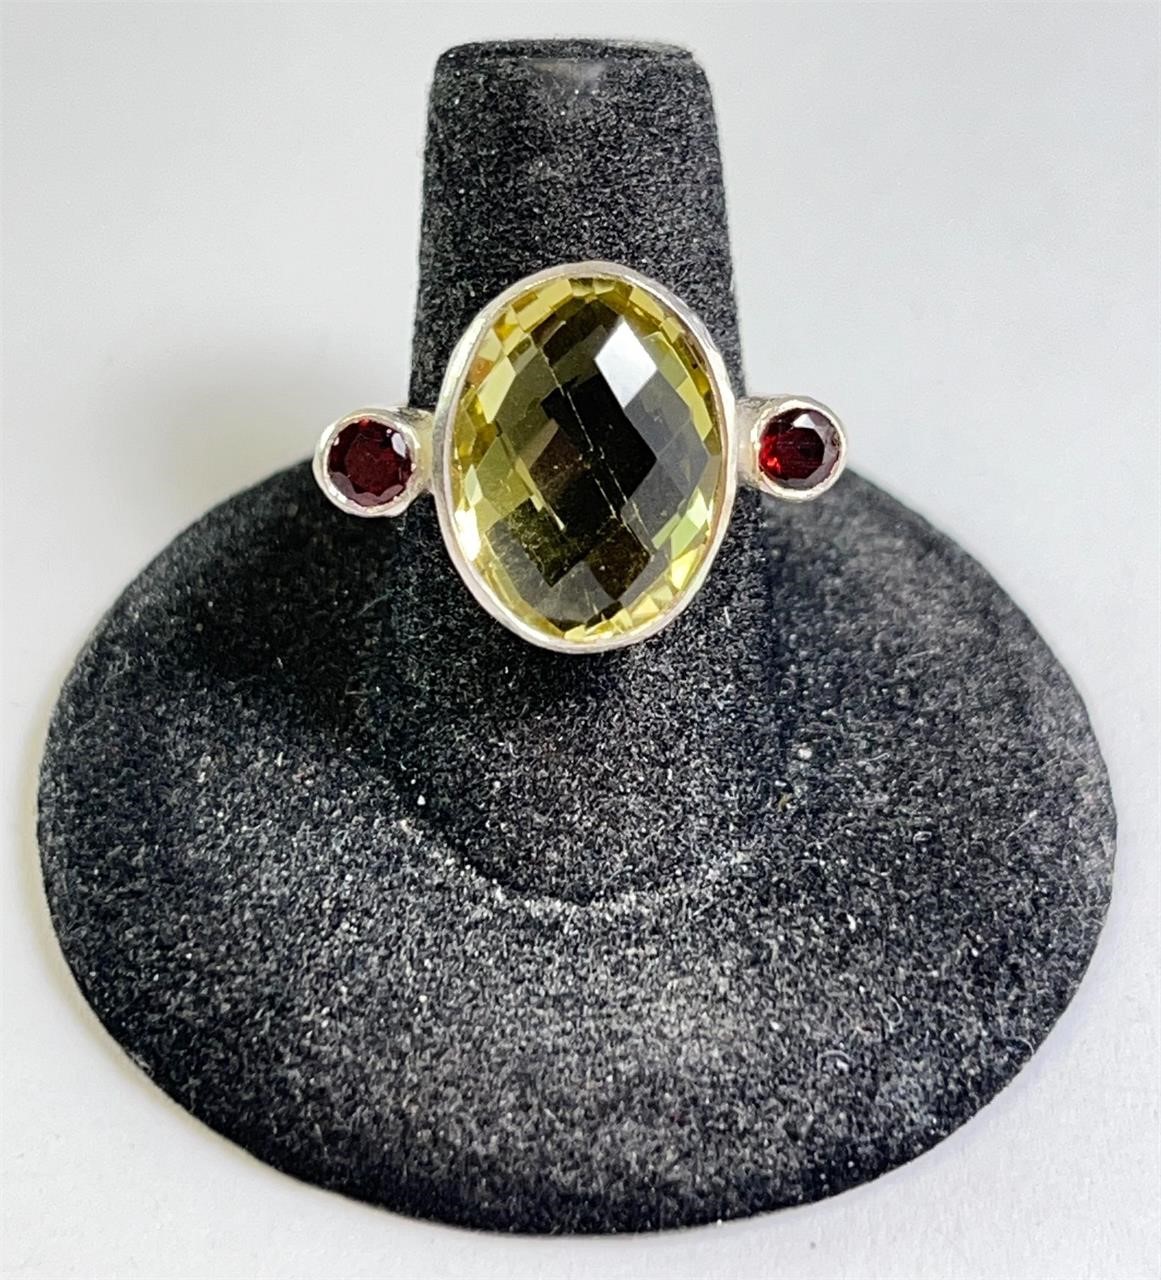 Uniqe Sterling Faceted Lg Peridot/Garnet Ring